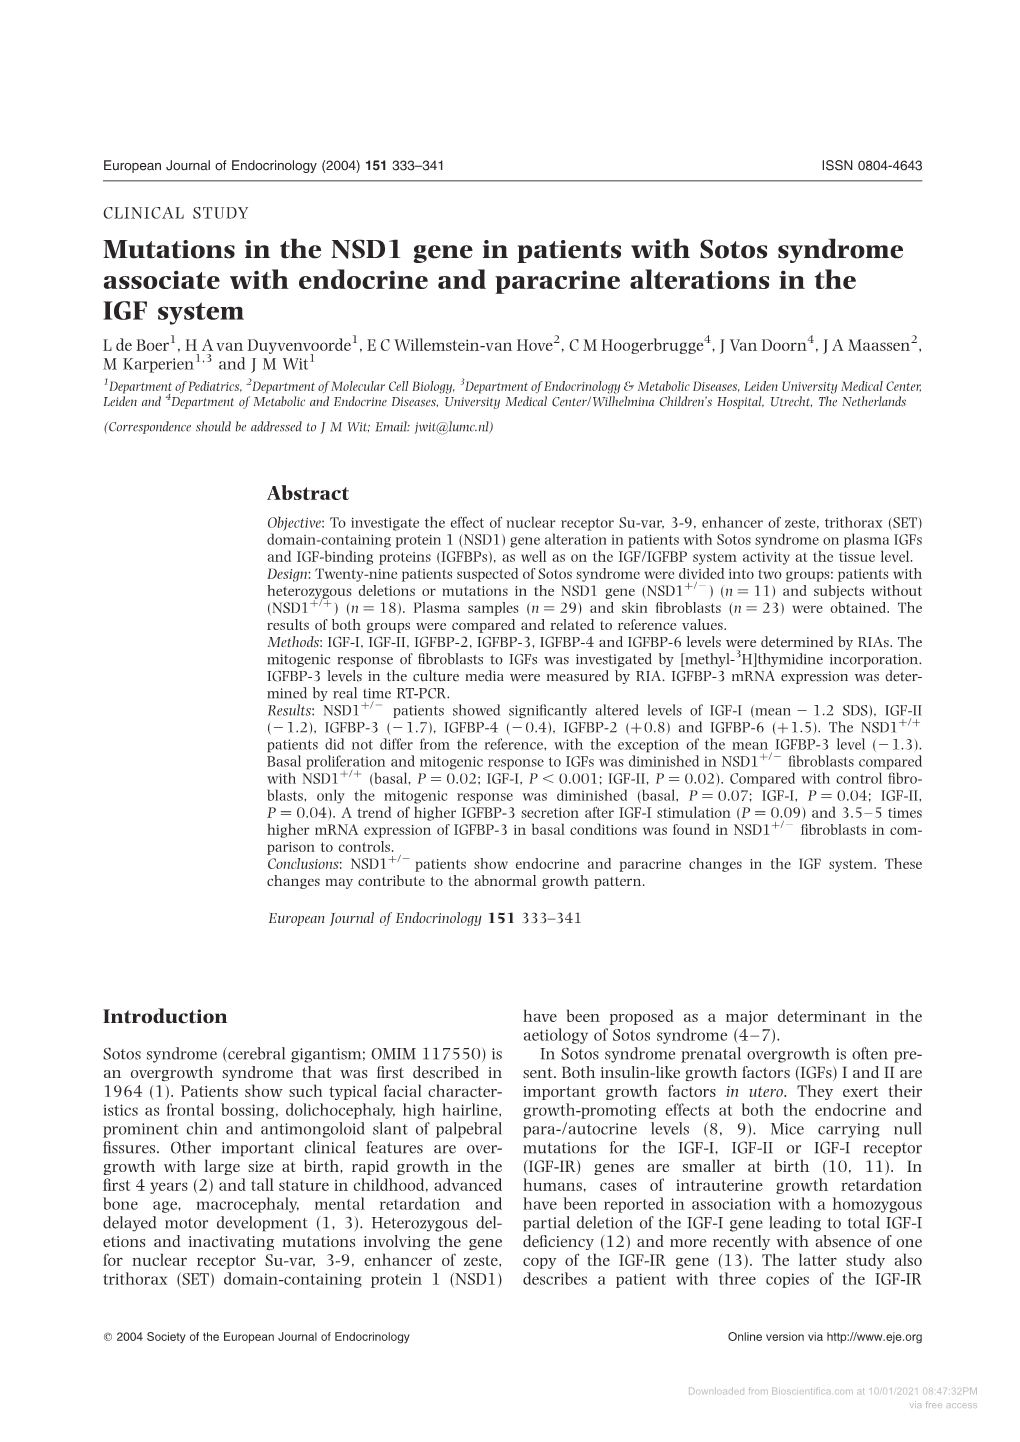 Mutations in the NSD1 Gene in Patients with Sotos Syndrome